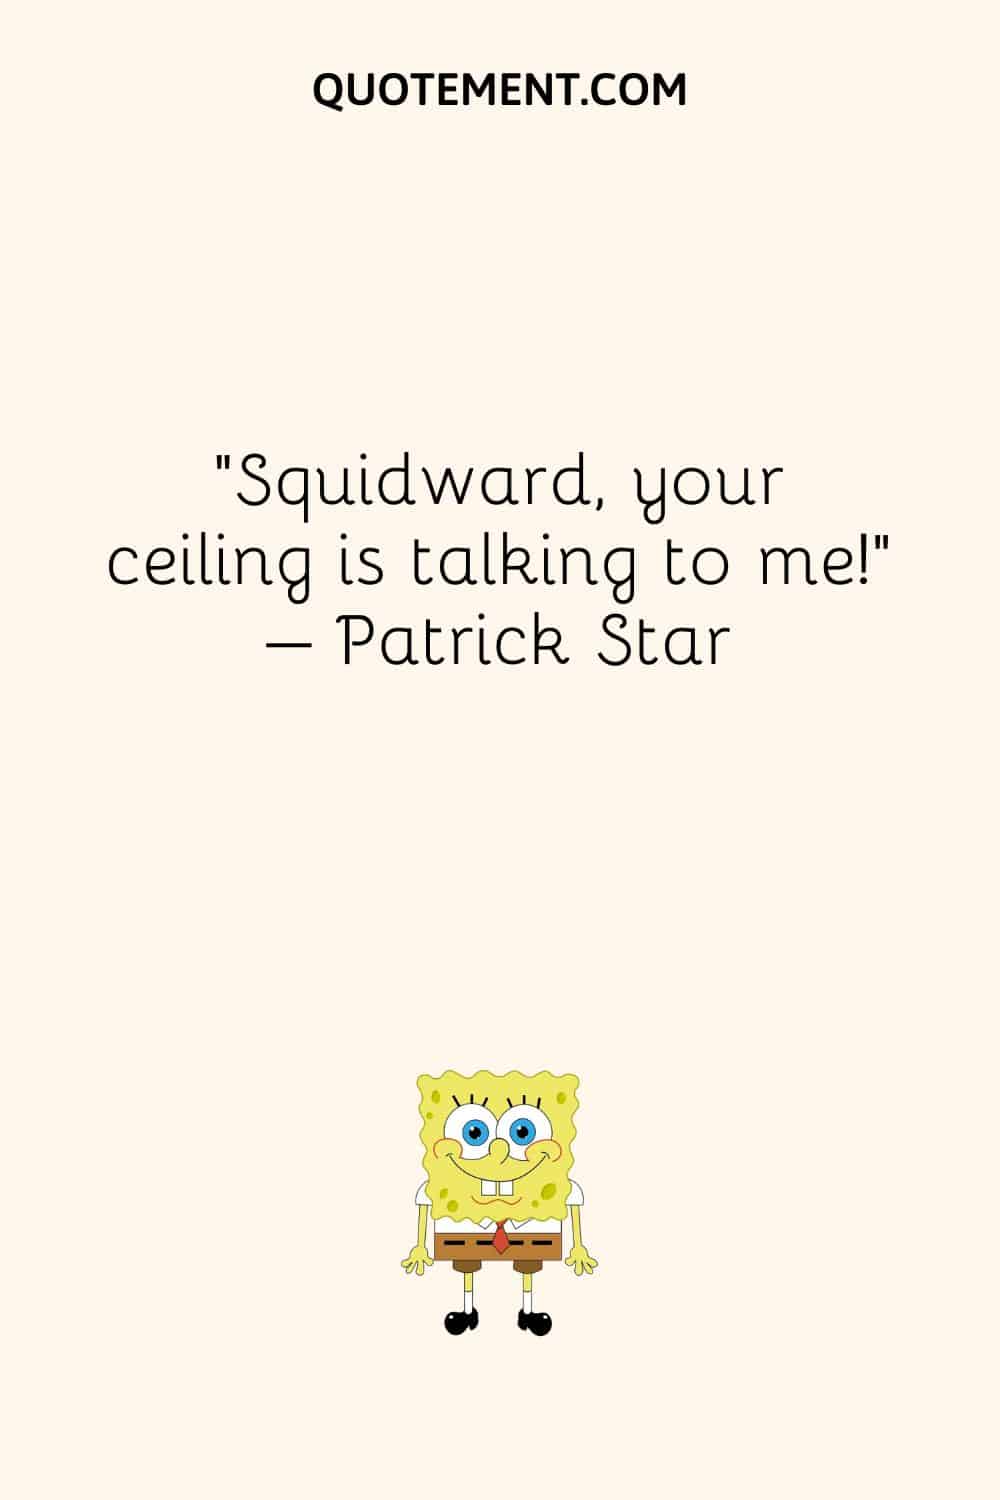 Squidward, your ceiling is talking to me! – Patrick Star